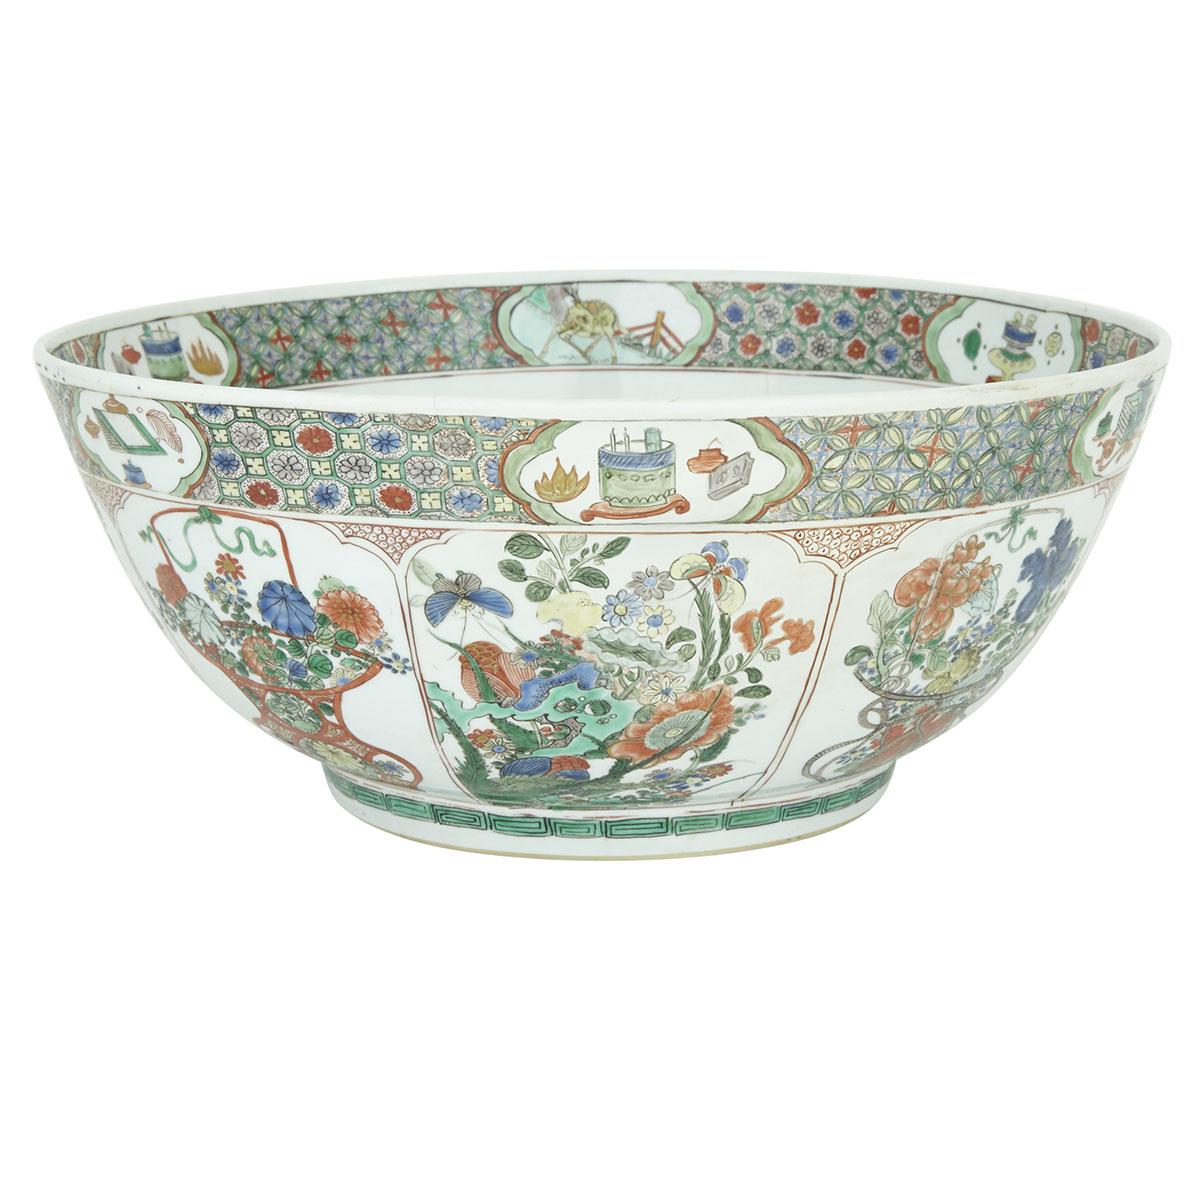 A MASSIVE FAMILLE-VERTE WUCAI PUNCH BOWL, MARK AND PERIOD OF KANGXI (1662-1772) 清康熙 五彩牡丹瑞果紋大碗 Finely - Image 8 of 10